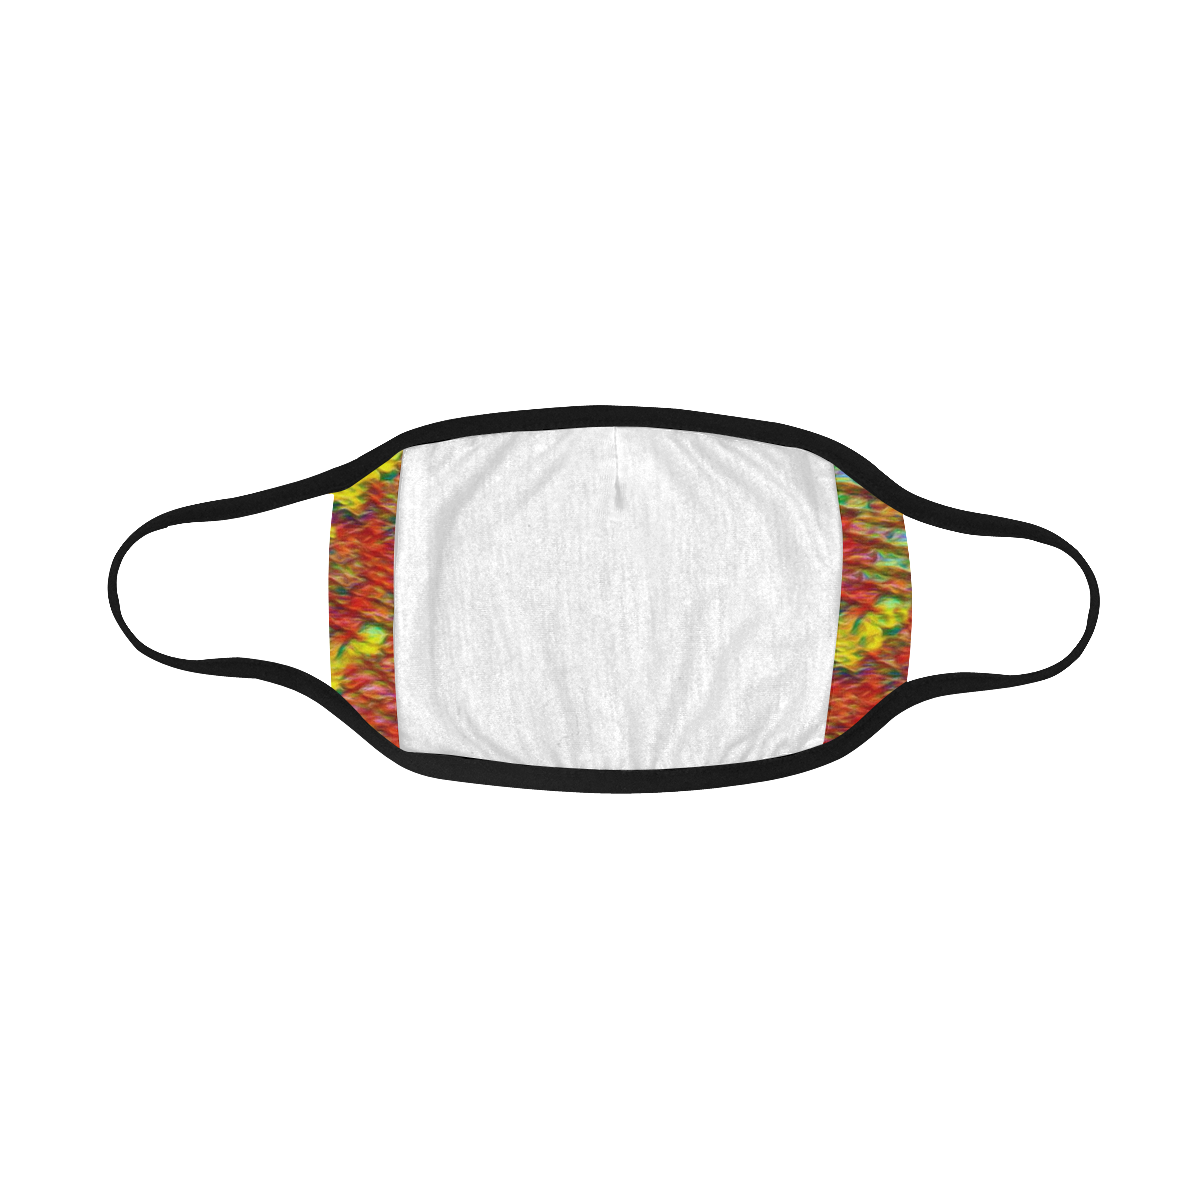 CAT MULTICOLOR MASK Mouth Mask